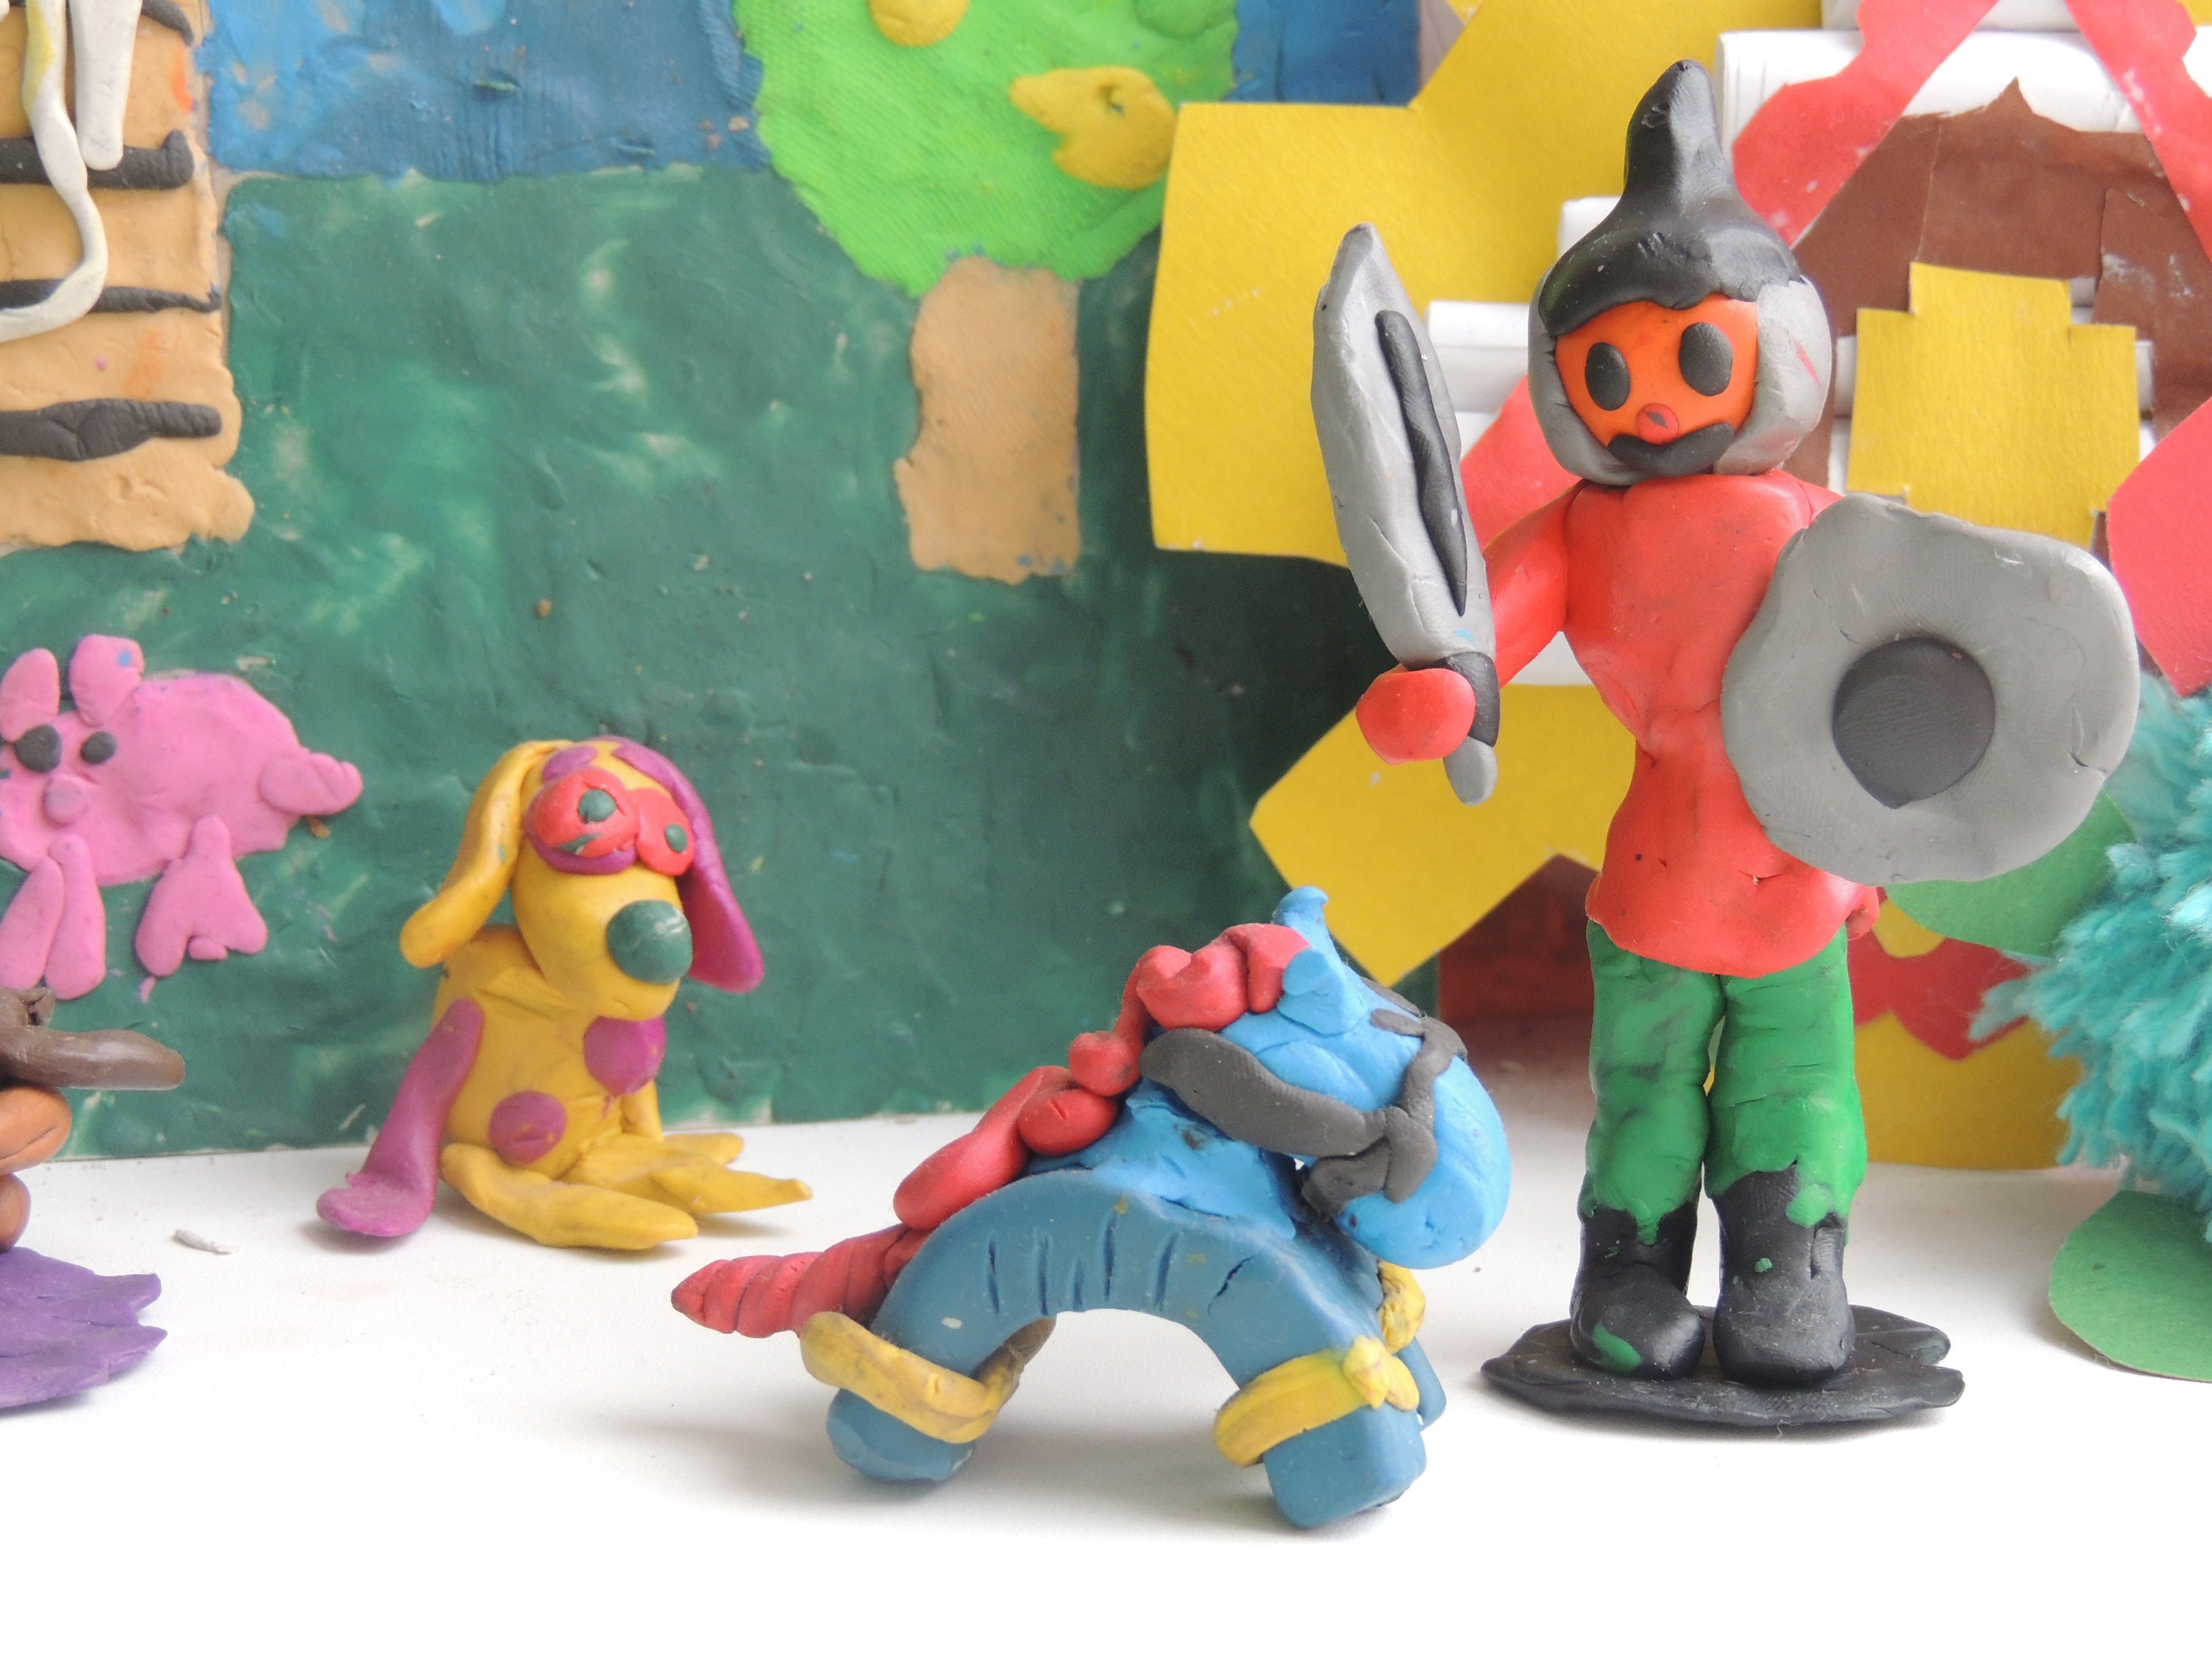 dog, horse and man holding sword and shield clay figurines